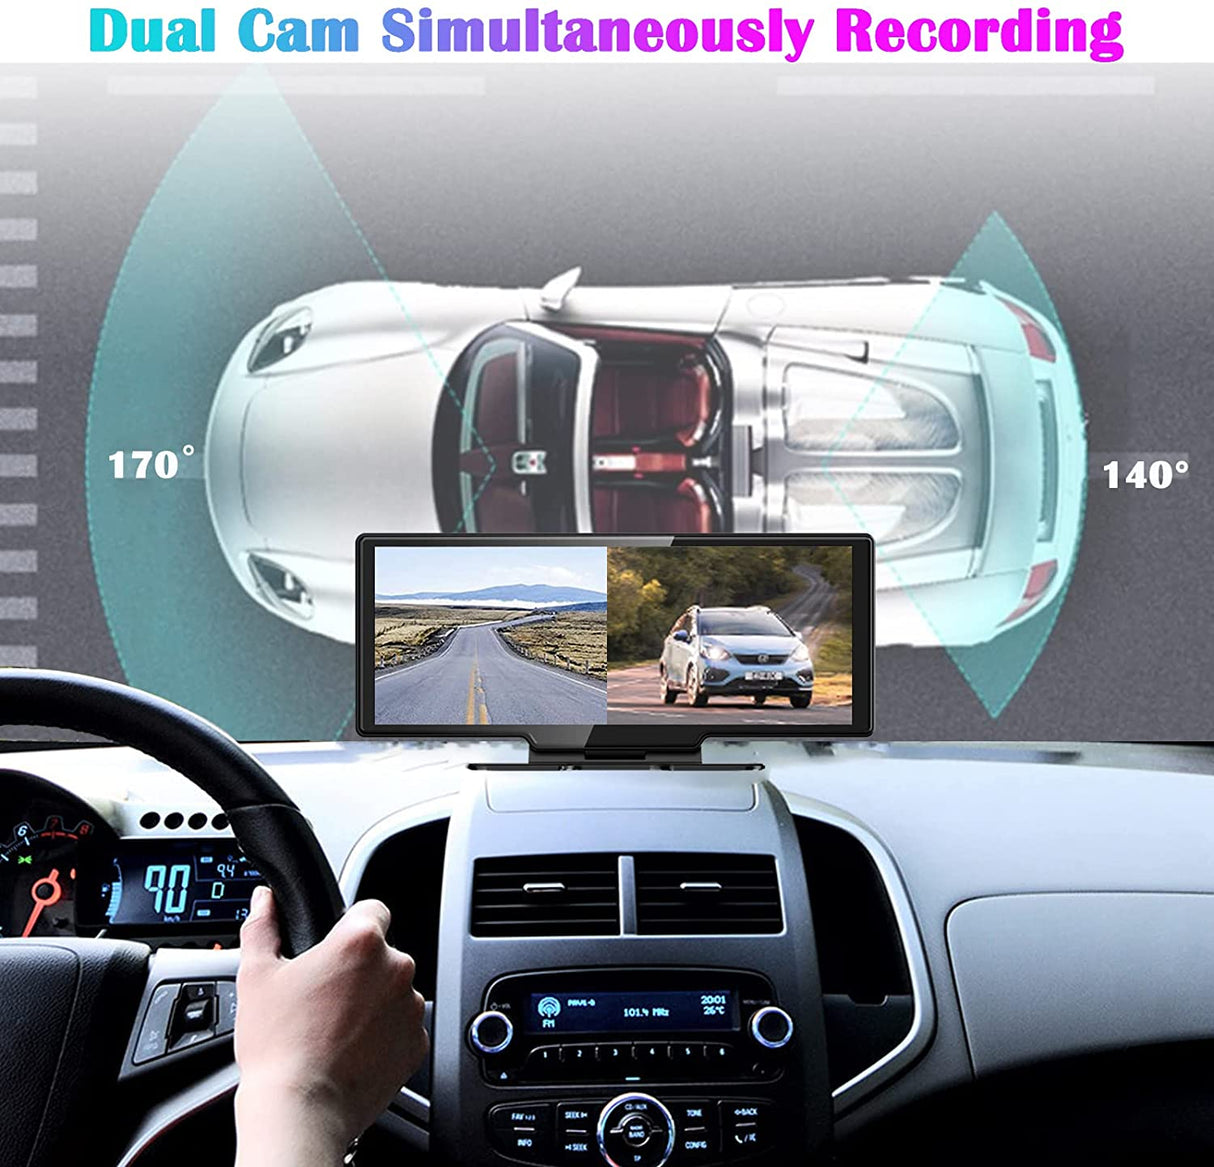 Binize 10'' Android radio with wide touchscreen in car, include front and back dash cam